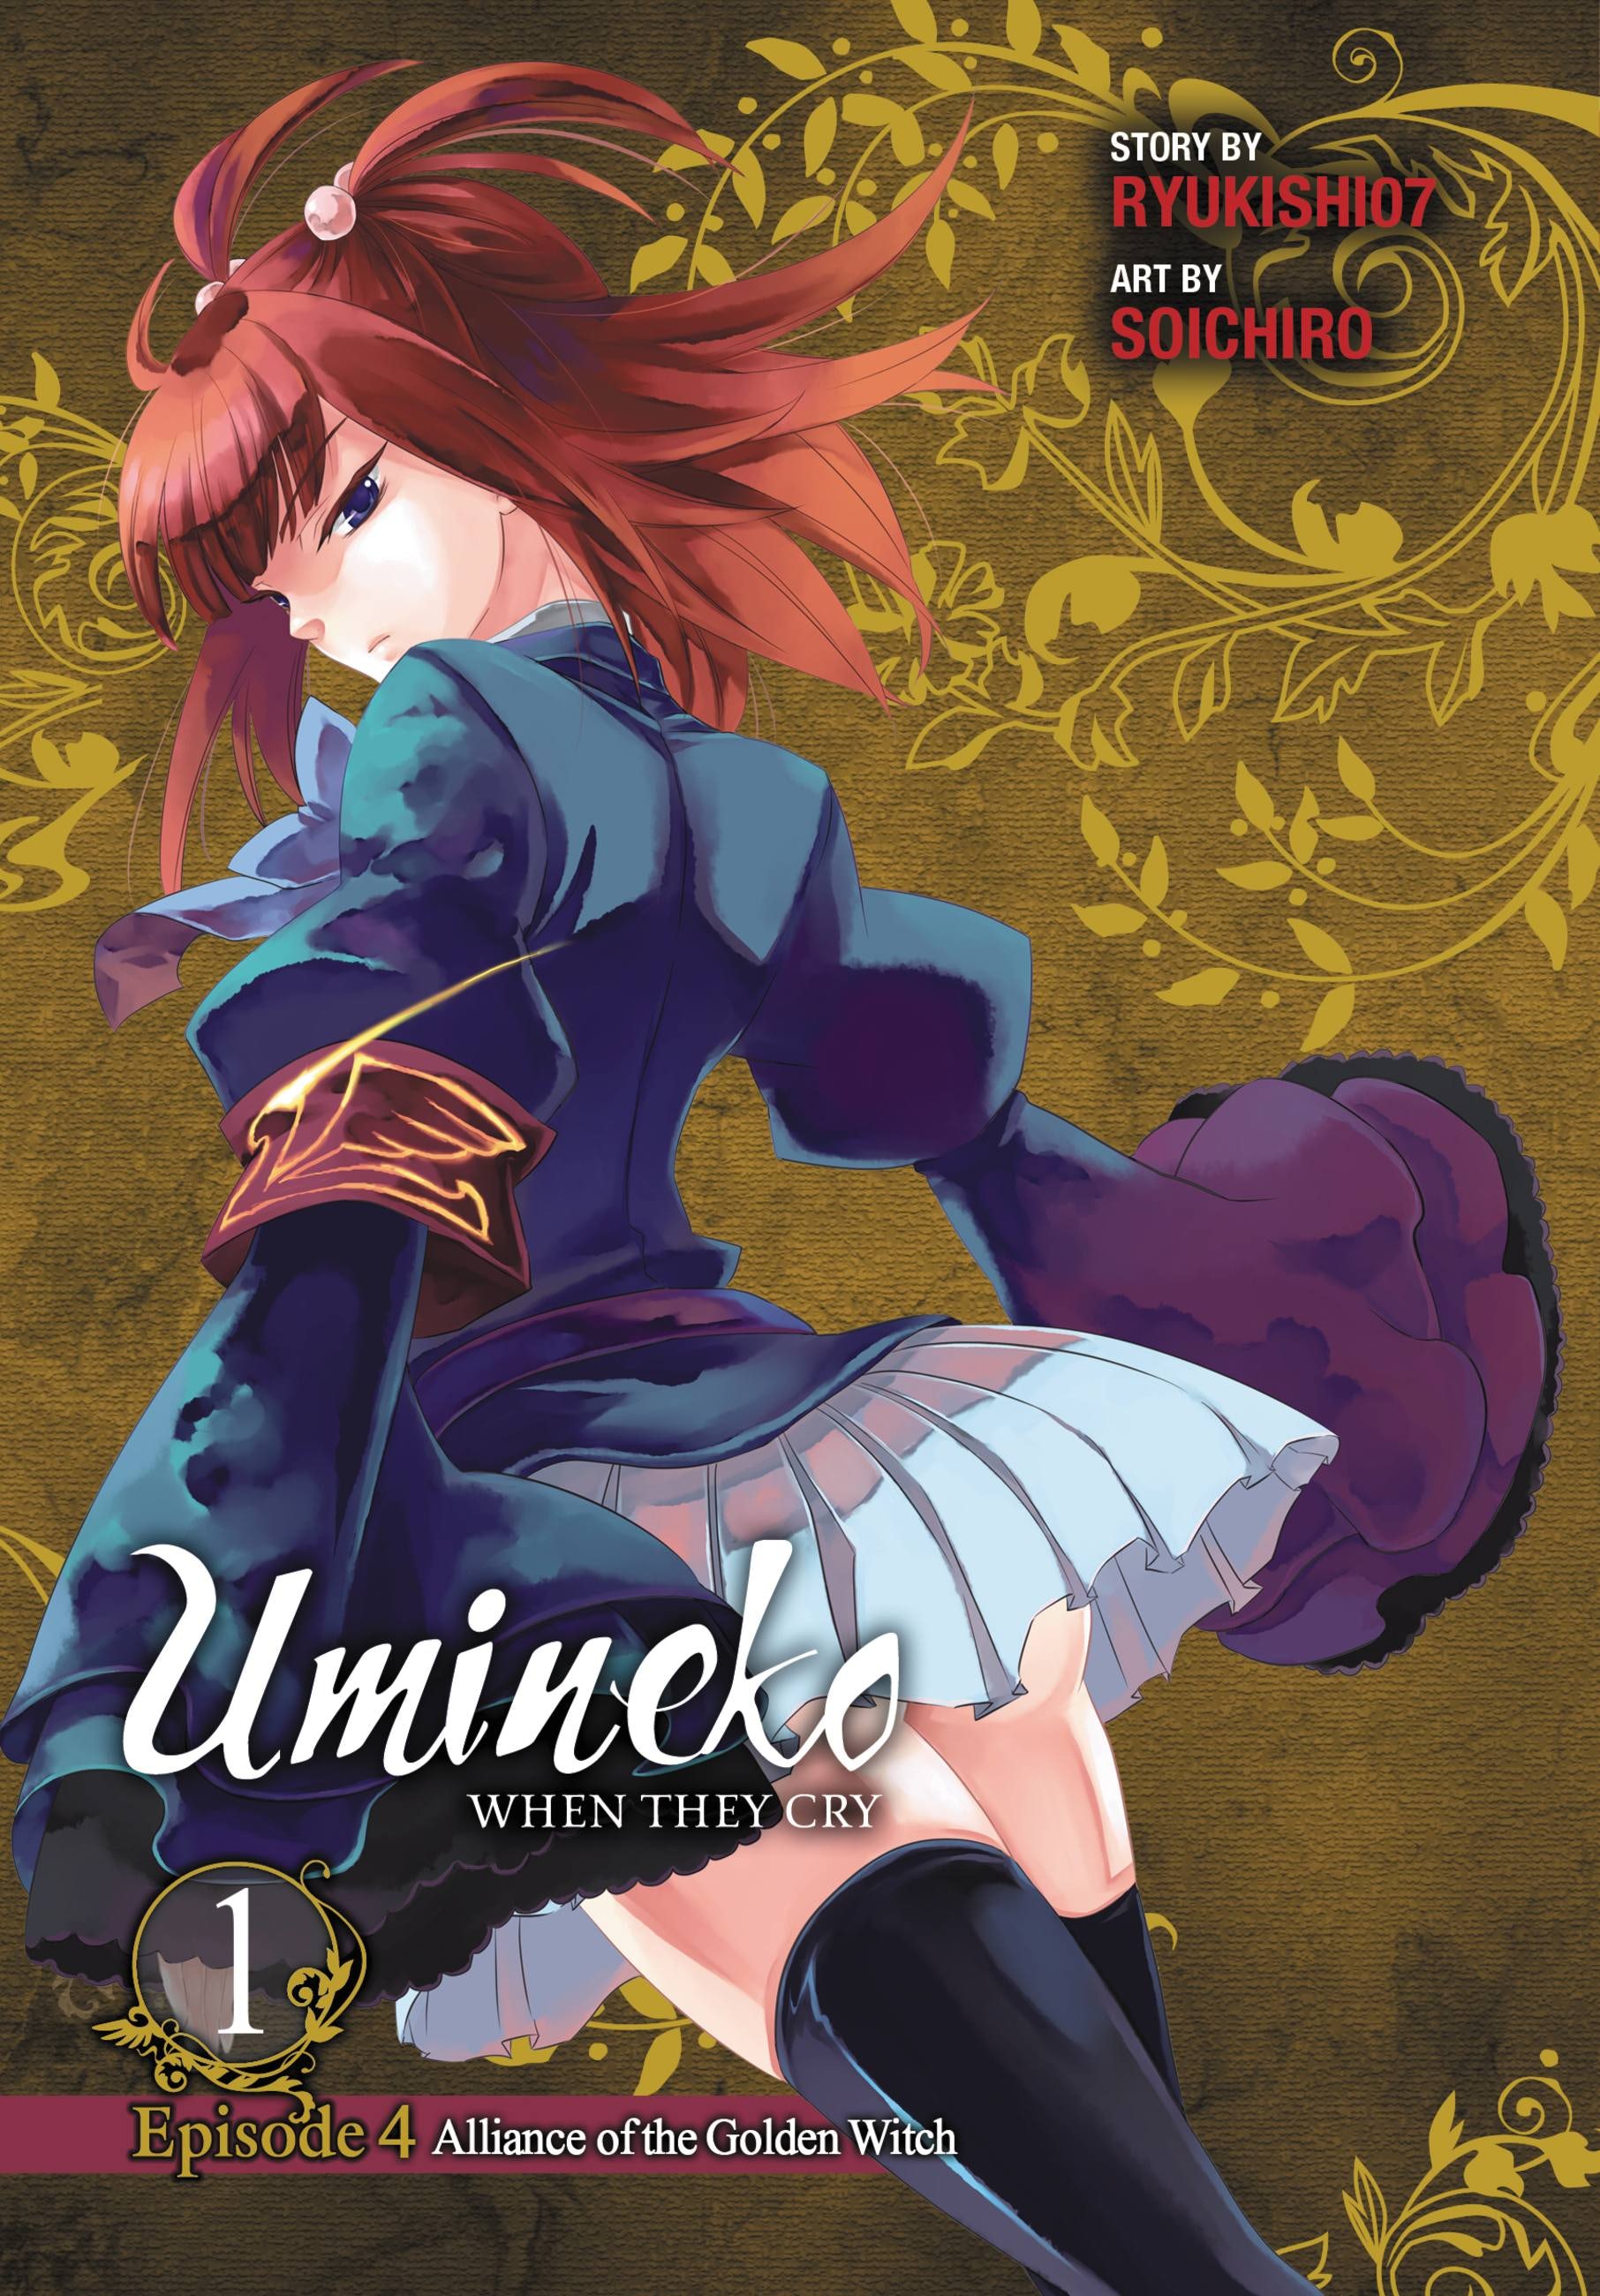 Product Image: Umineko WHEN THEY CRY Episode 4: Alliance of the Golden Witch, Vol. 1